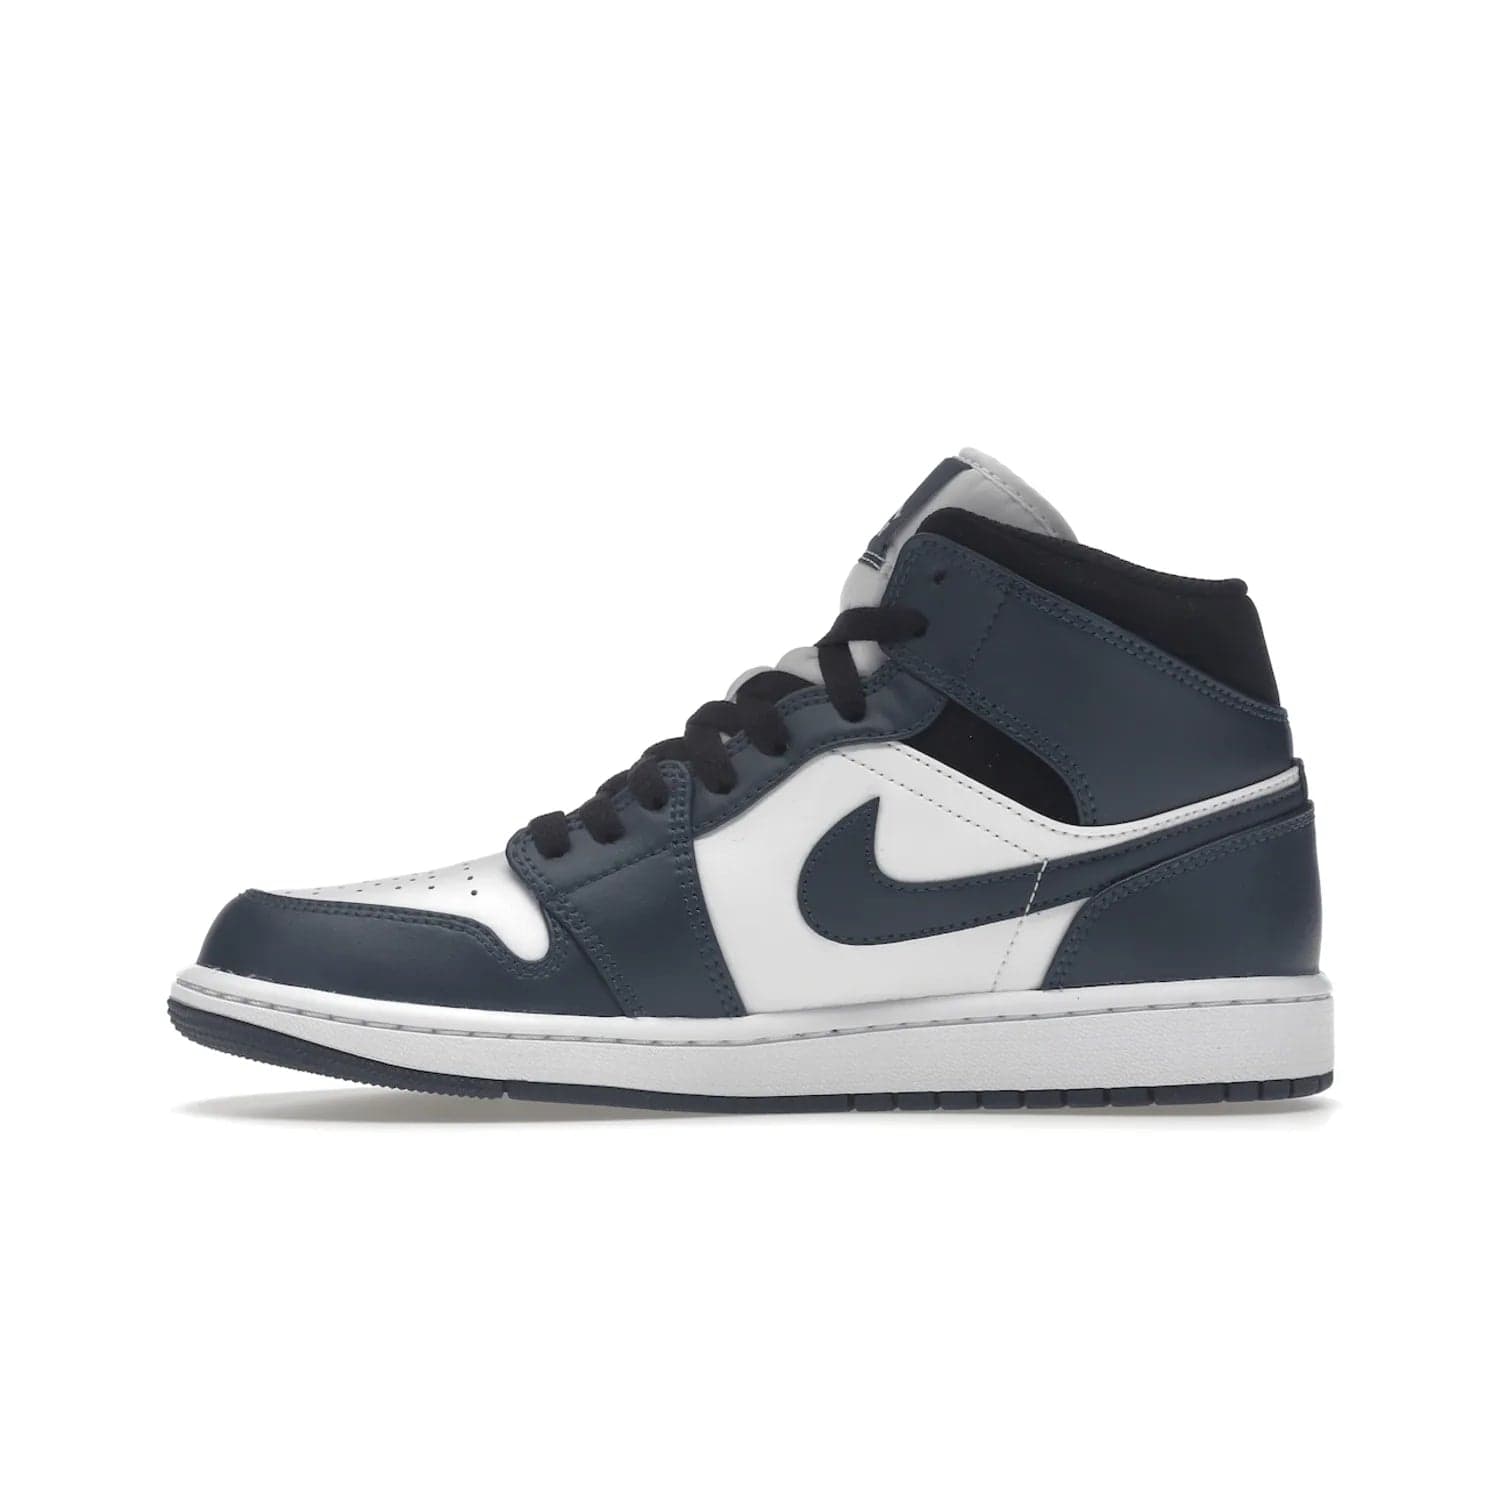 Jordan 1 Mid Armory Navy - Image 19 - Only at www.BallersClubKickz.com - The Jordan 1 Mid Armory Navy: classic basketball sneaker with soft white leather upper, deep navy blue overlays, and black leather ankle detailing. Iconic style with Jordan Wings logo and Jumpman label.